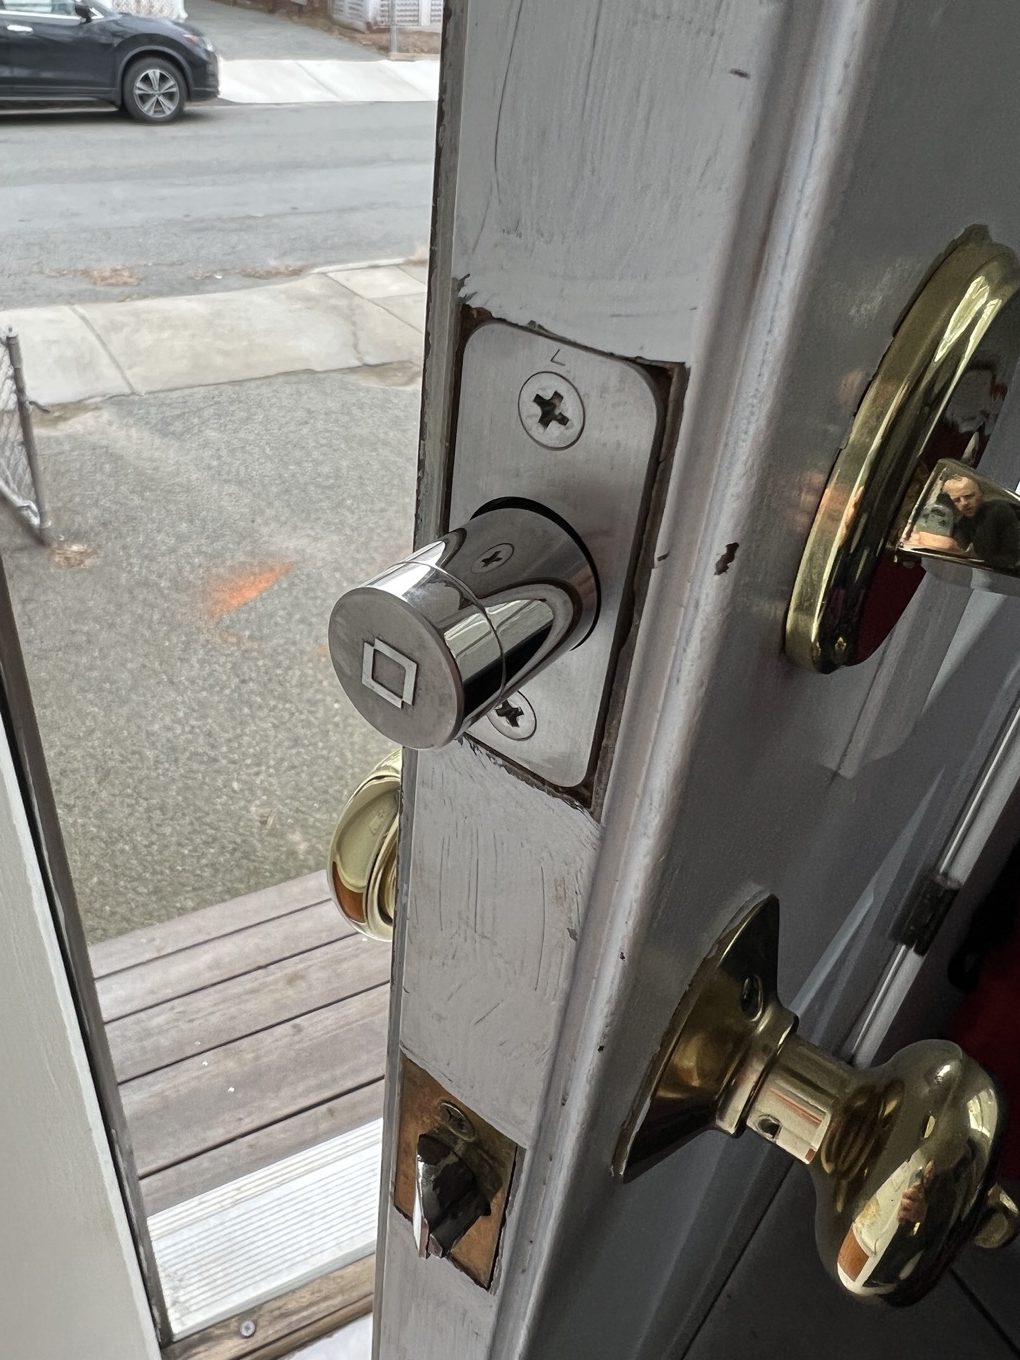 Review: Level Bolt is a stealthy smart lock contending with an